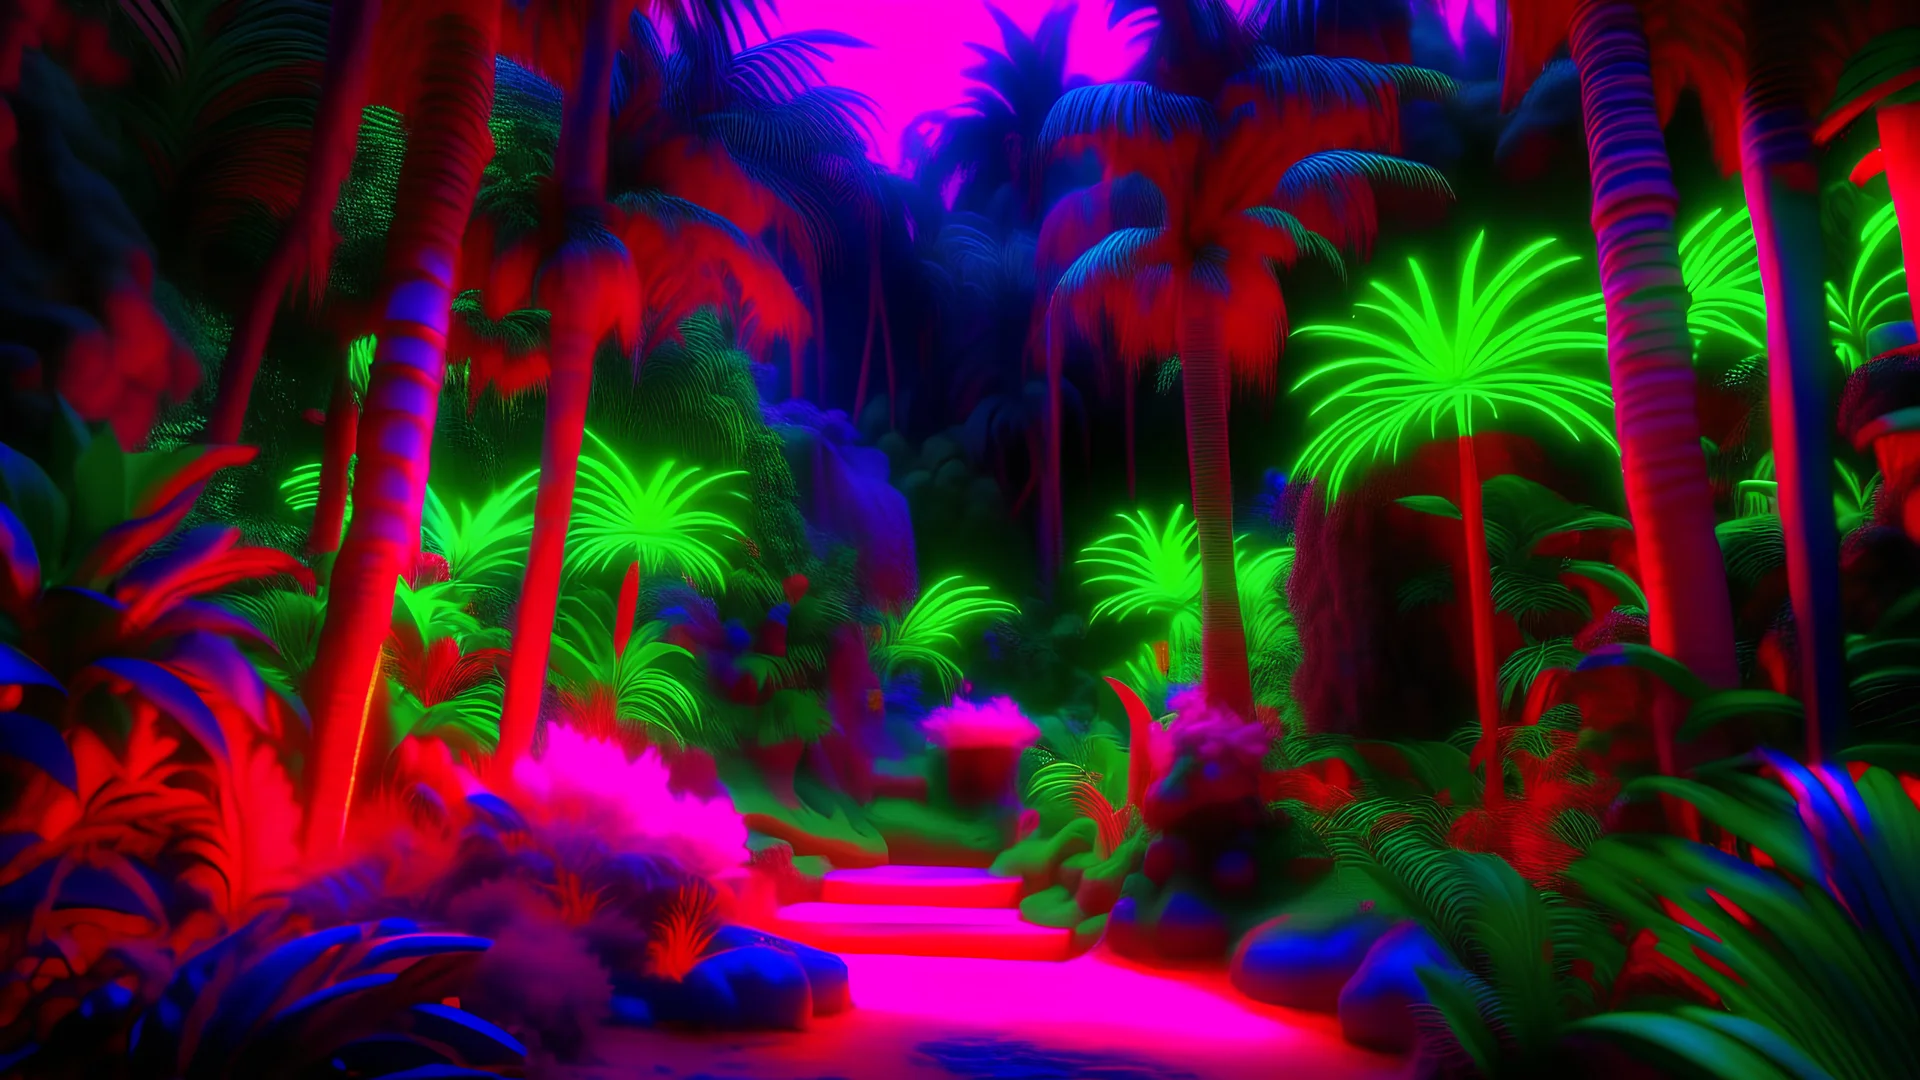 WARM RAINBOW COLORED AMAZONIAN DREAMSCAPE PARADISE RAINFOREST GARDENS OF ARCTURIAN NEVERLAND WITH BOLD&THICK RICH NEON COLORS AND COLORFULL LED LIGHTING FOR GLOBAL ILLUMINATION